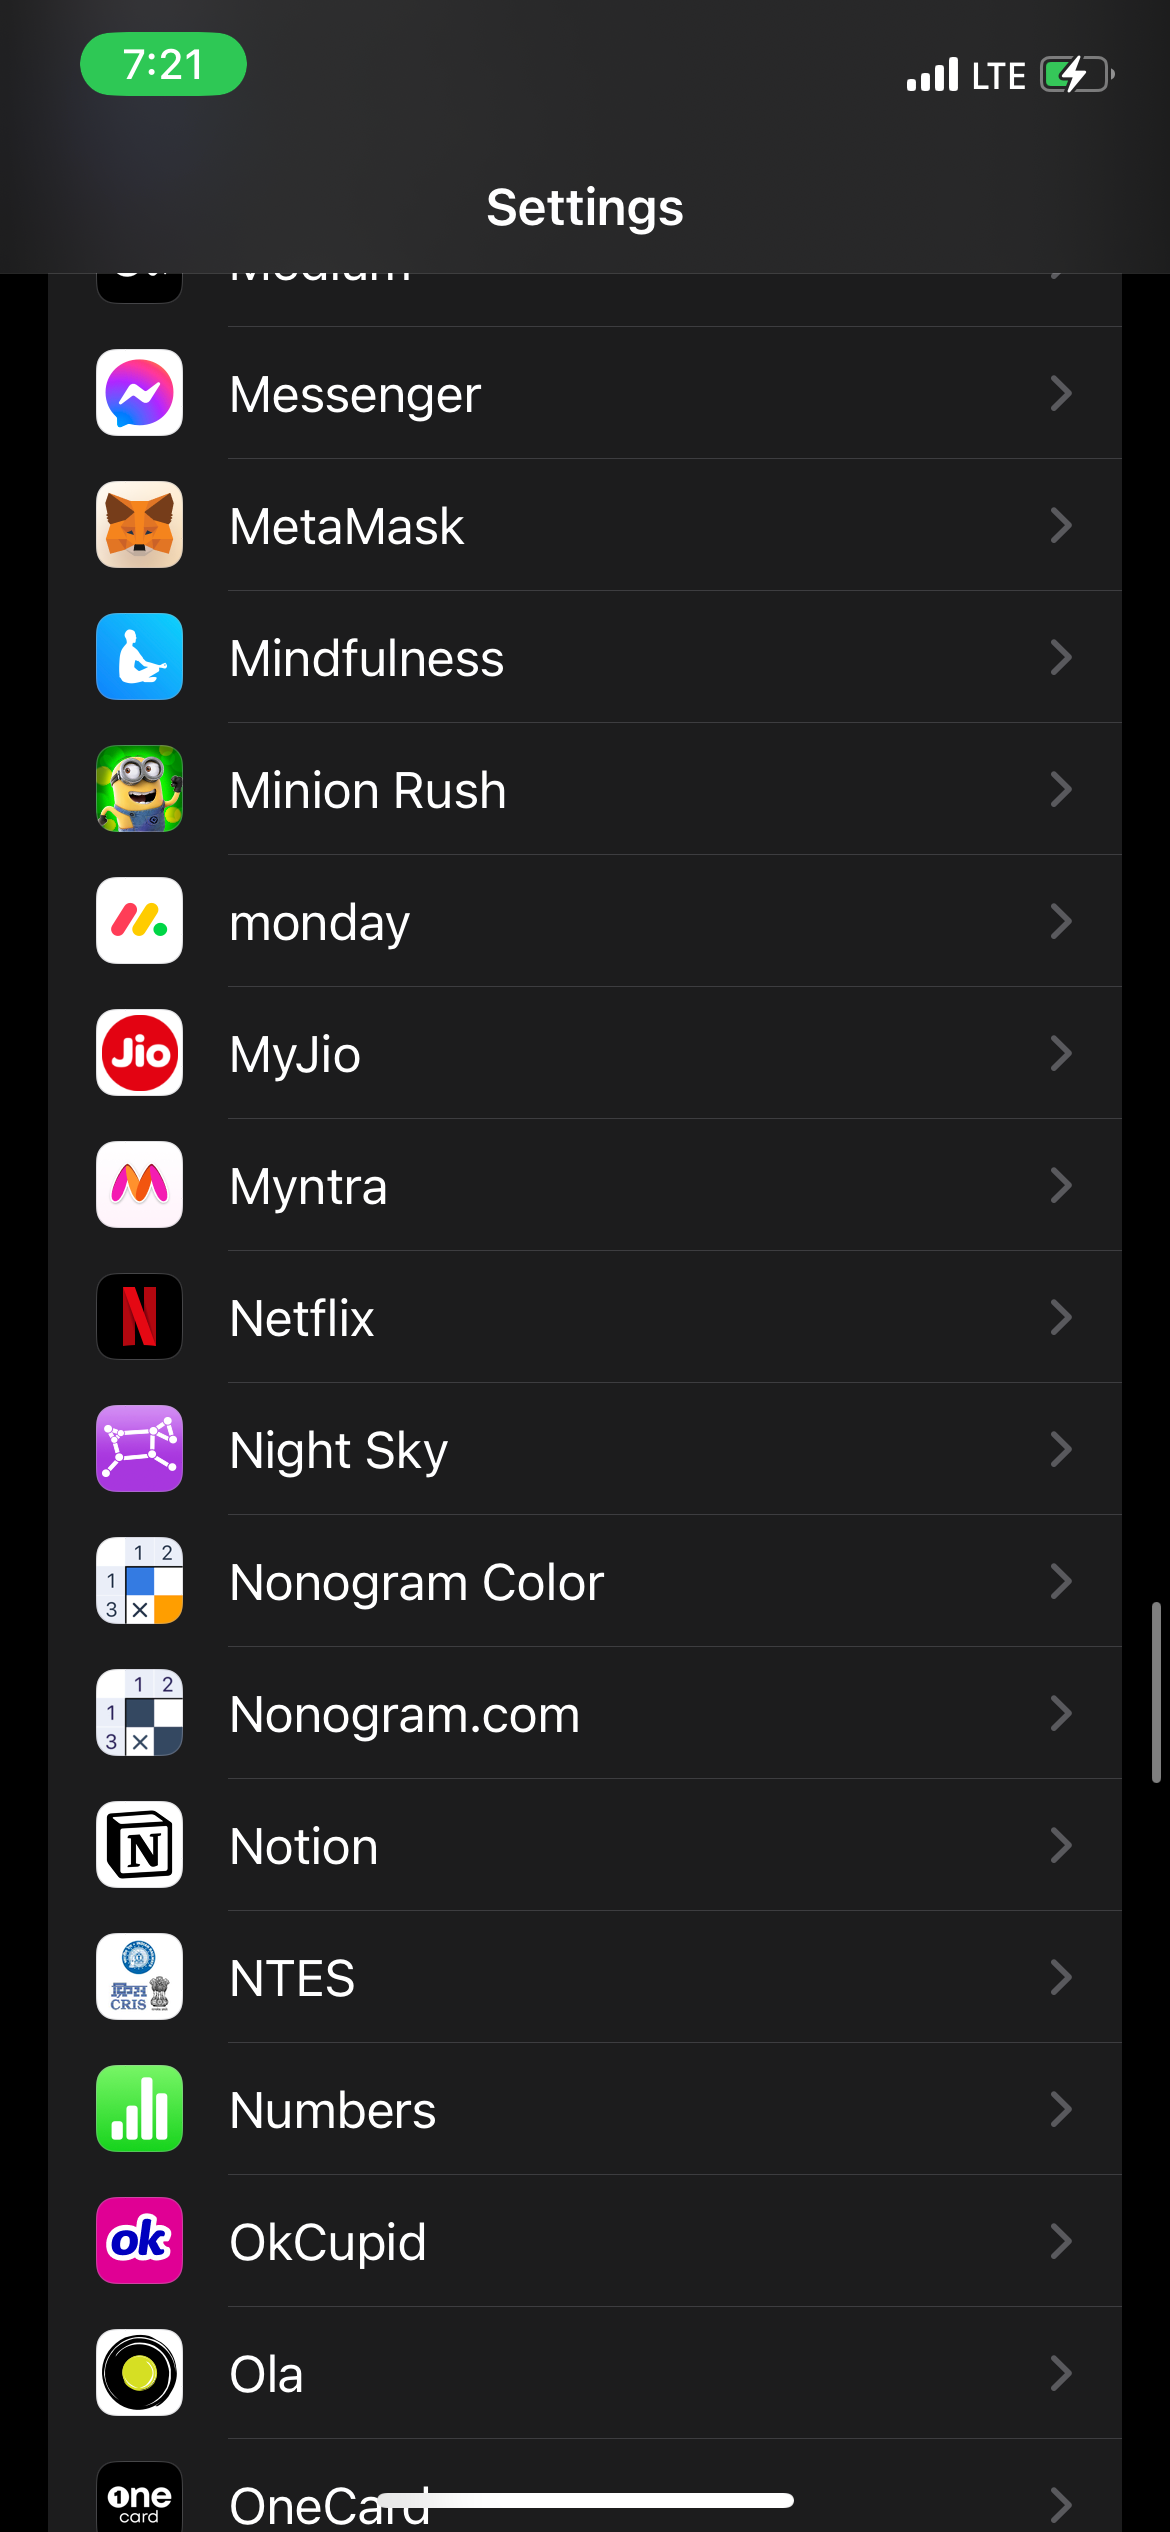 Go to your iPhone settings and select Netflix.